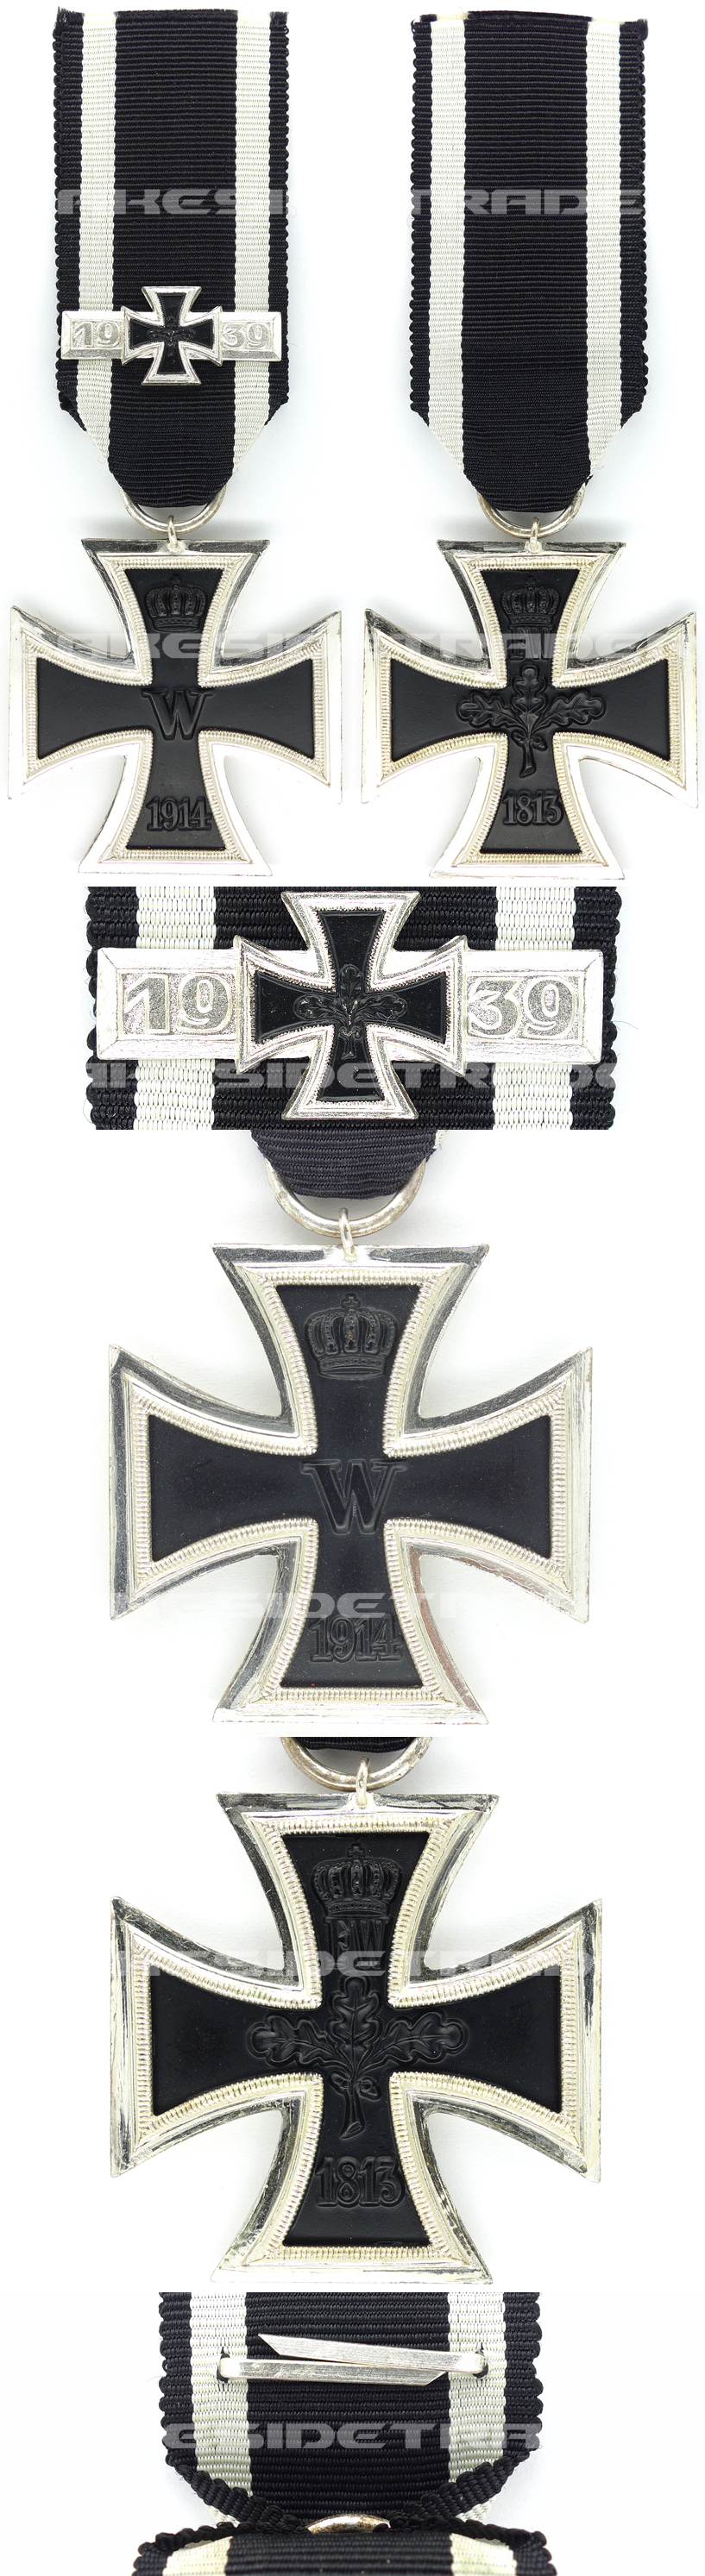 1957 Version - 2nd Class Iron Cross and Spange by S&L